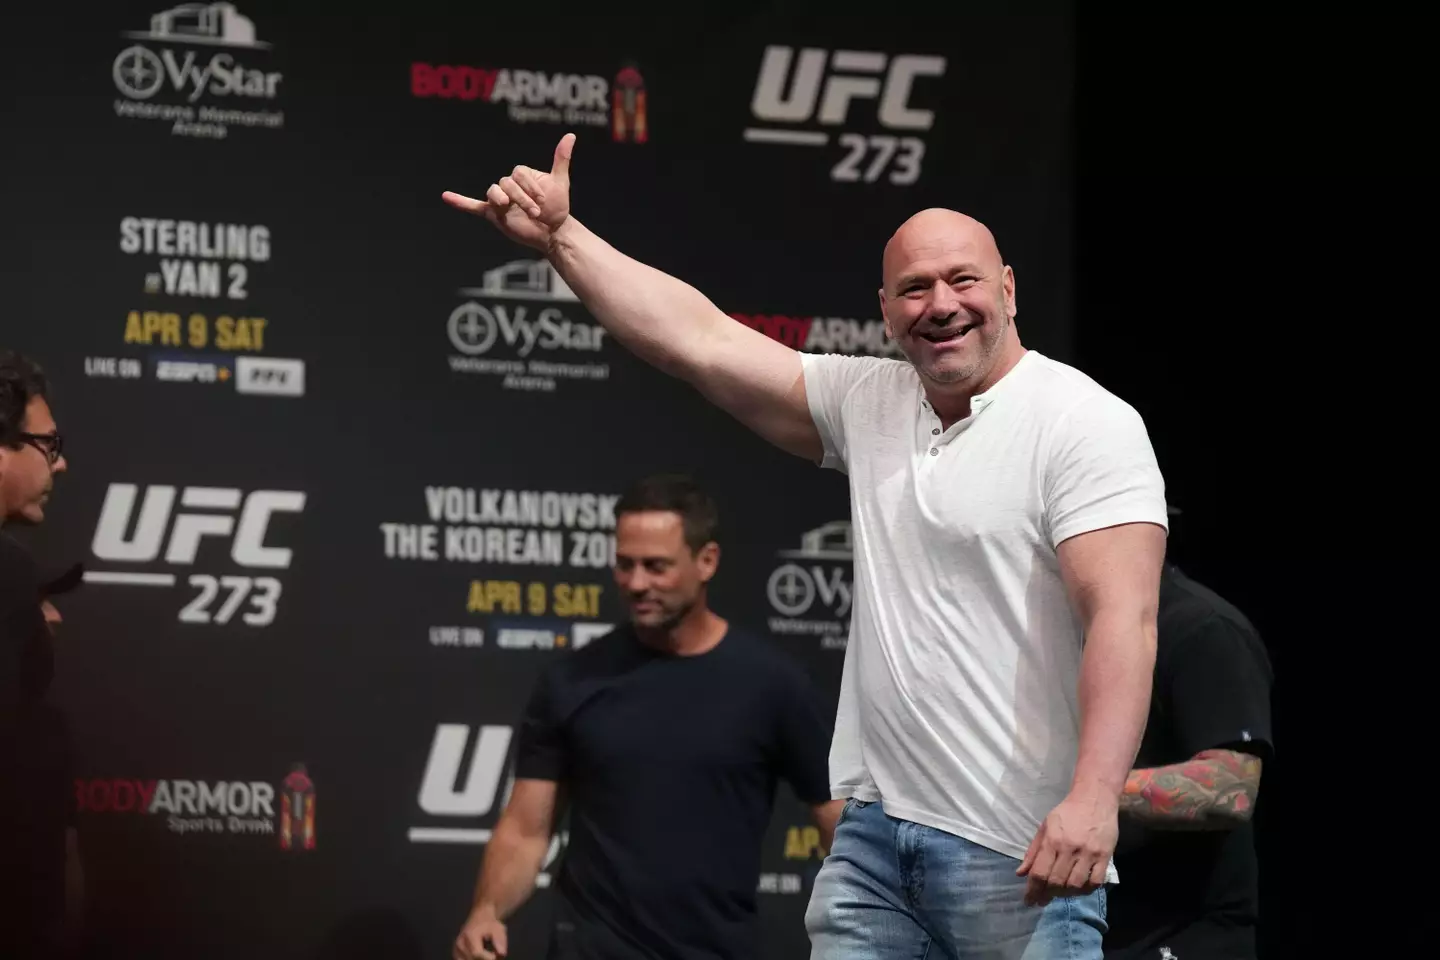 Dana White has gifted a YouTuber $250,000 (£210,000) as a birthday present.